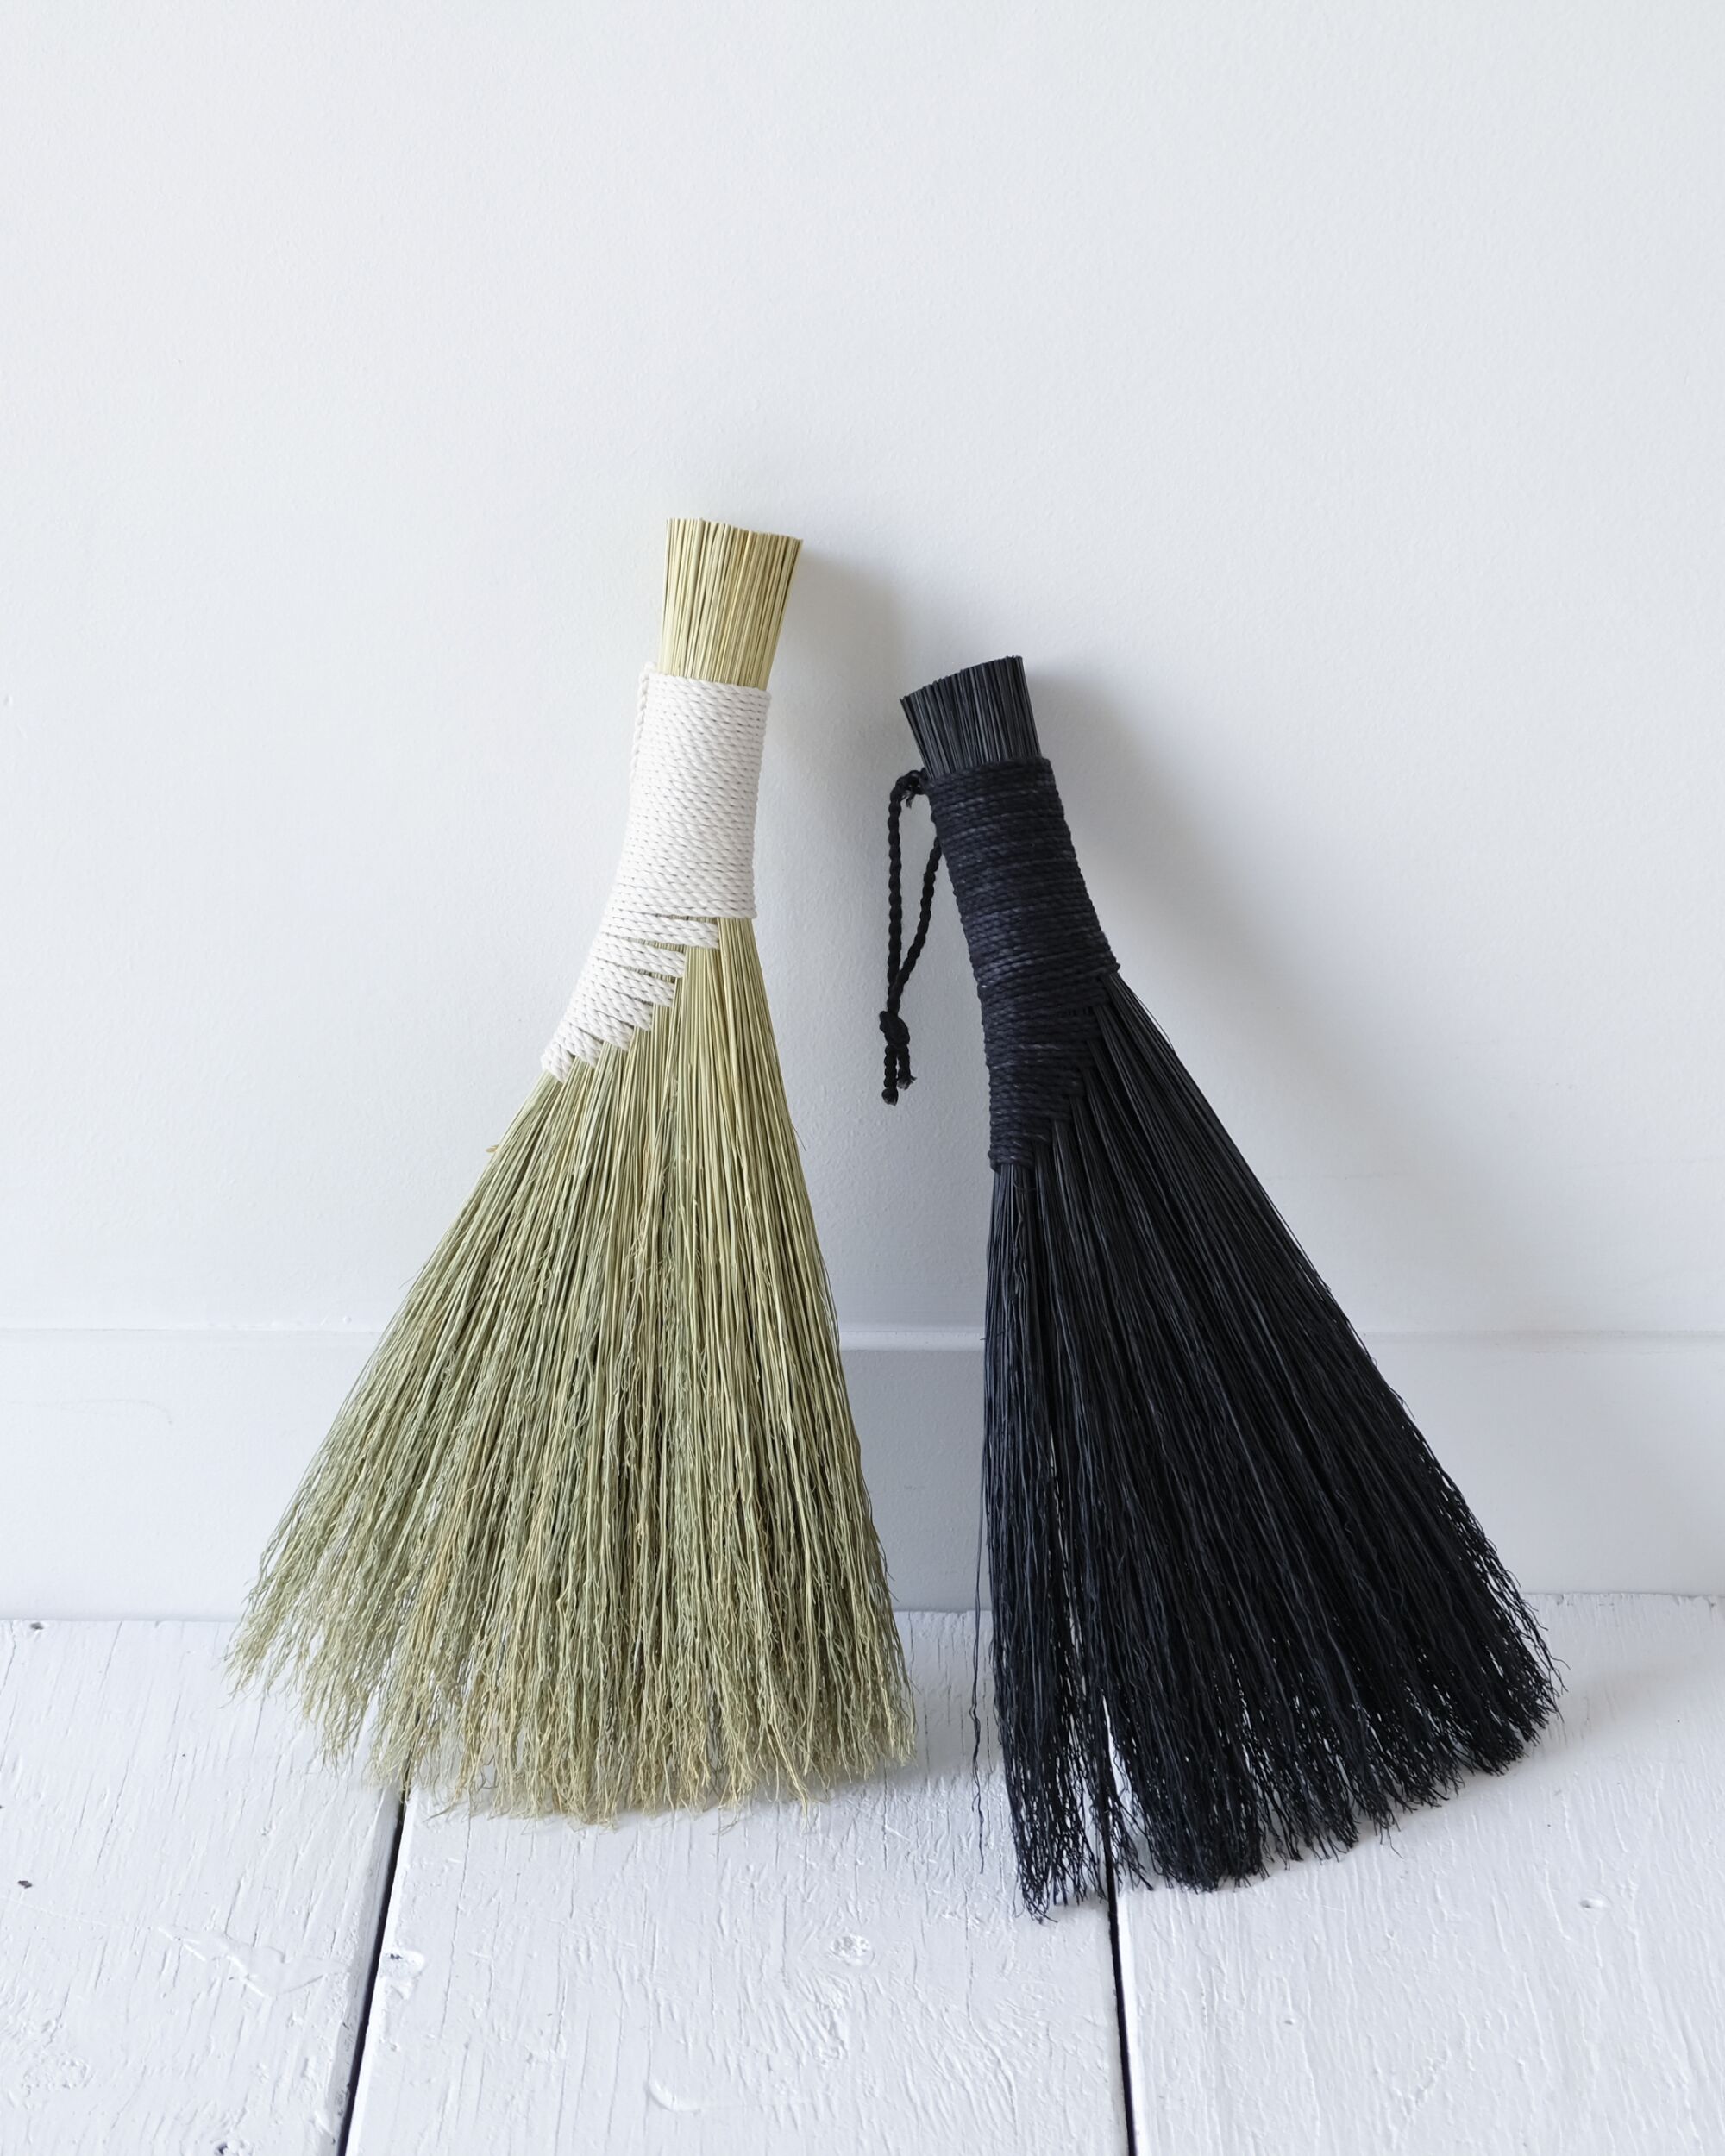 Winged hand brooms in tan and black